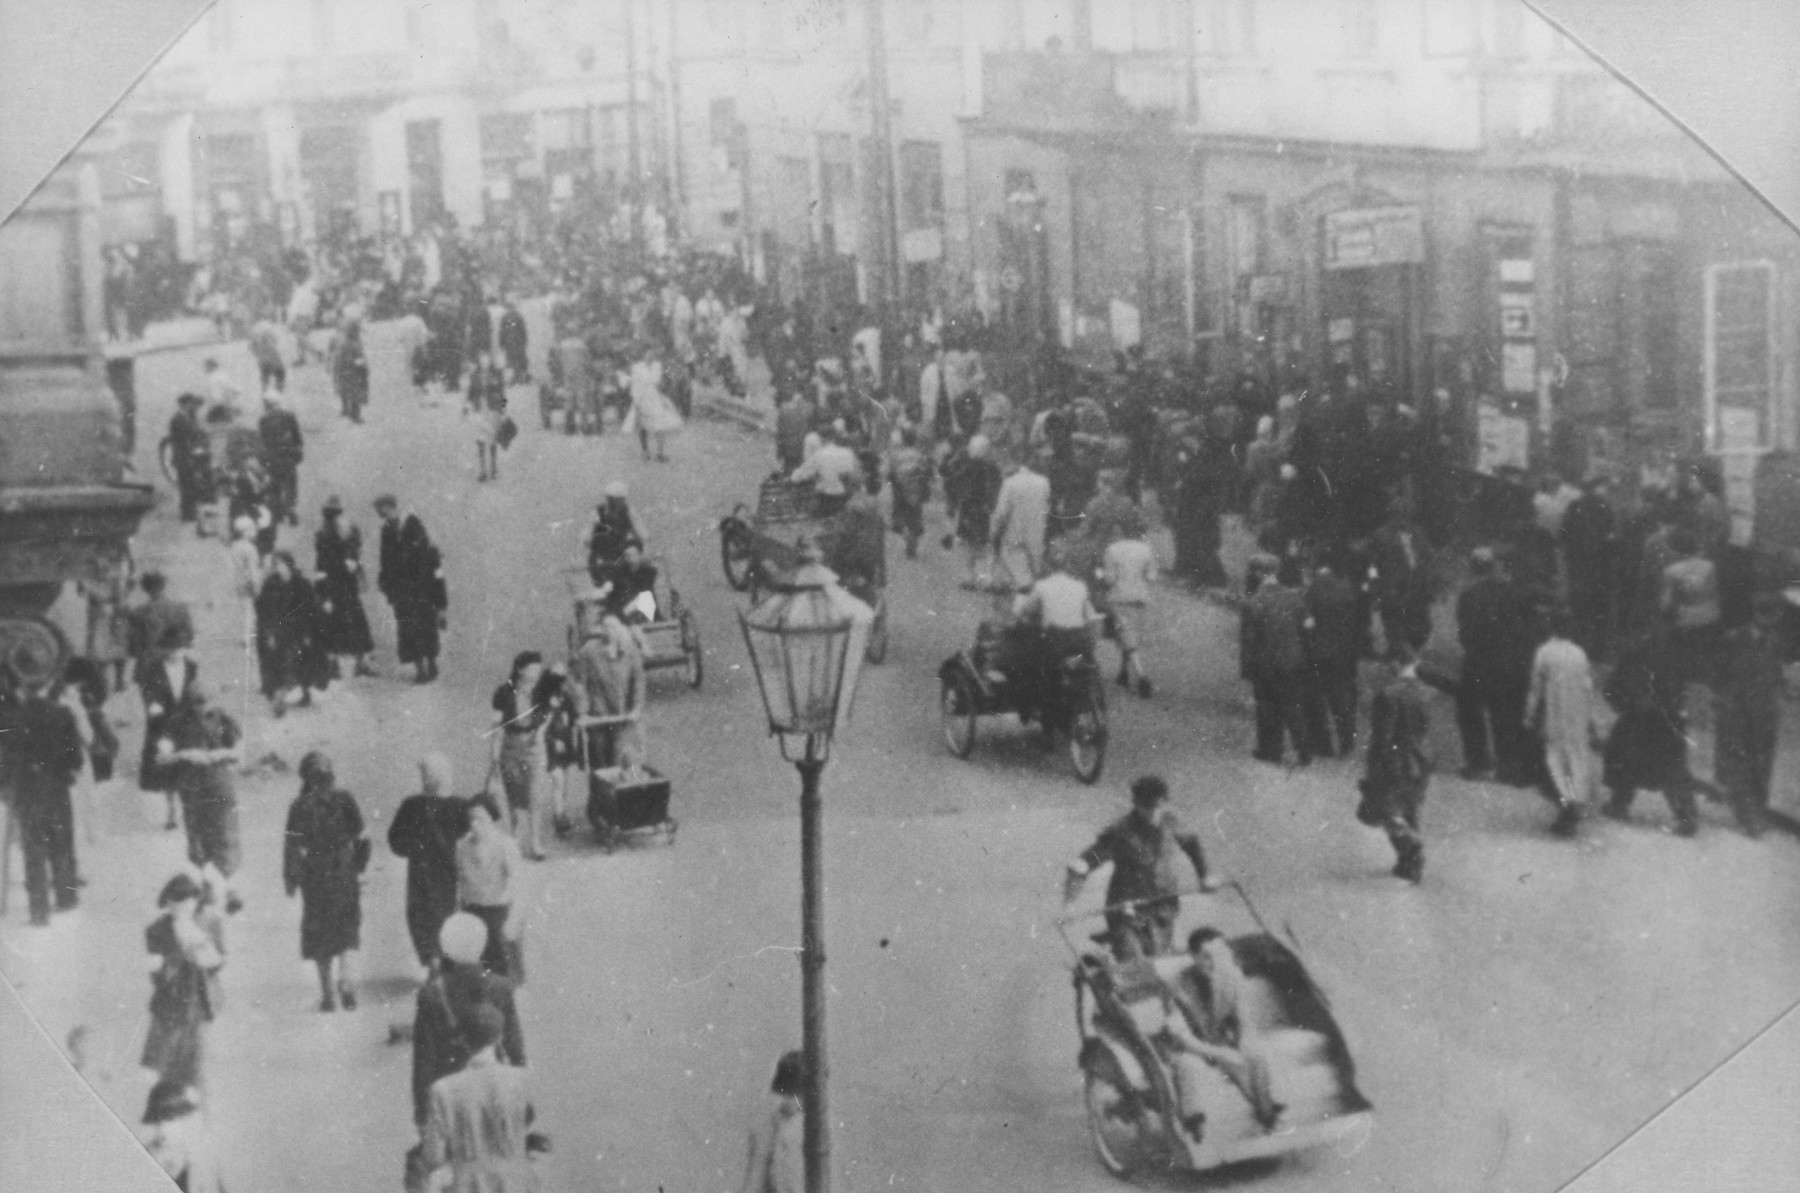 Large numbers of Jews walk and ride along a street in the Warsaw ghetto.